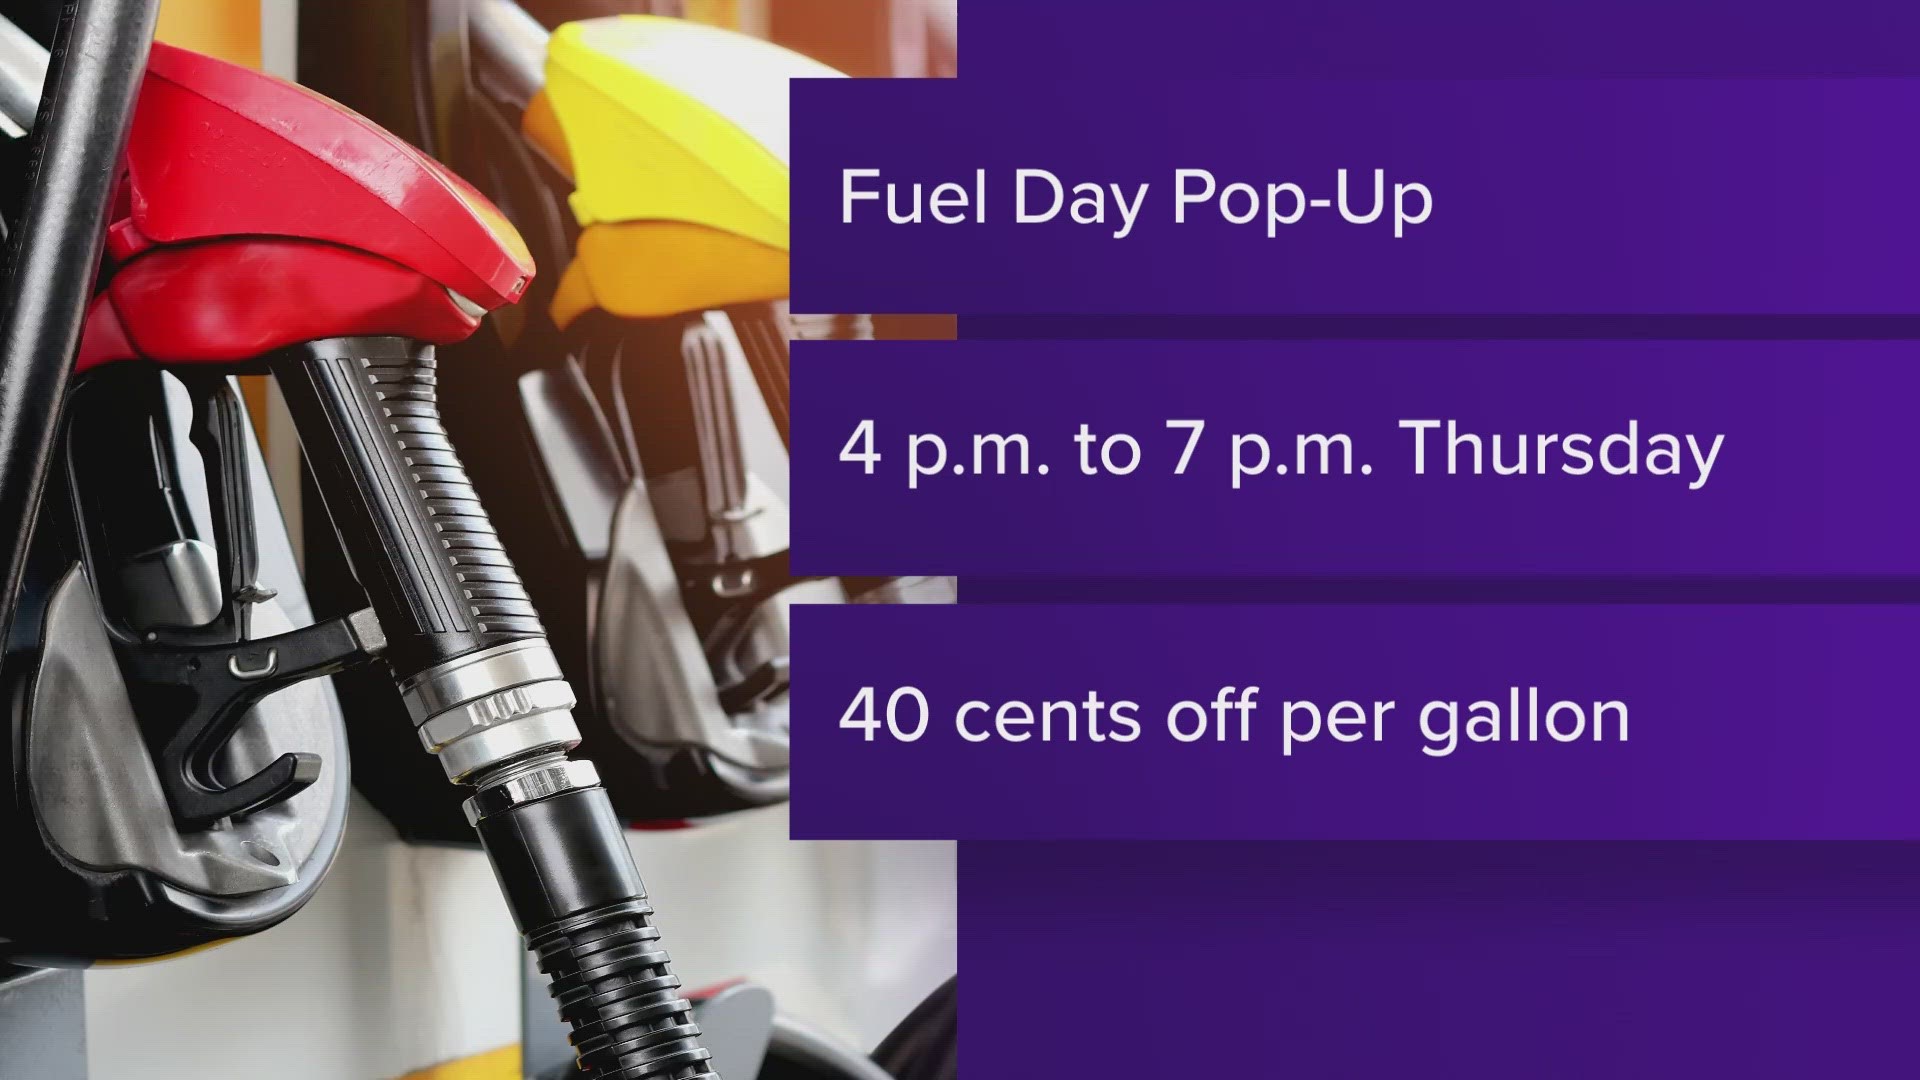 If you need to fuel up, Circle K is giving customers the chance to save 40 cents per gallon Thursday evening.